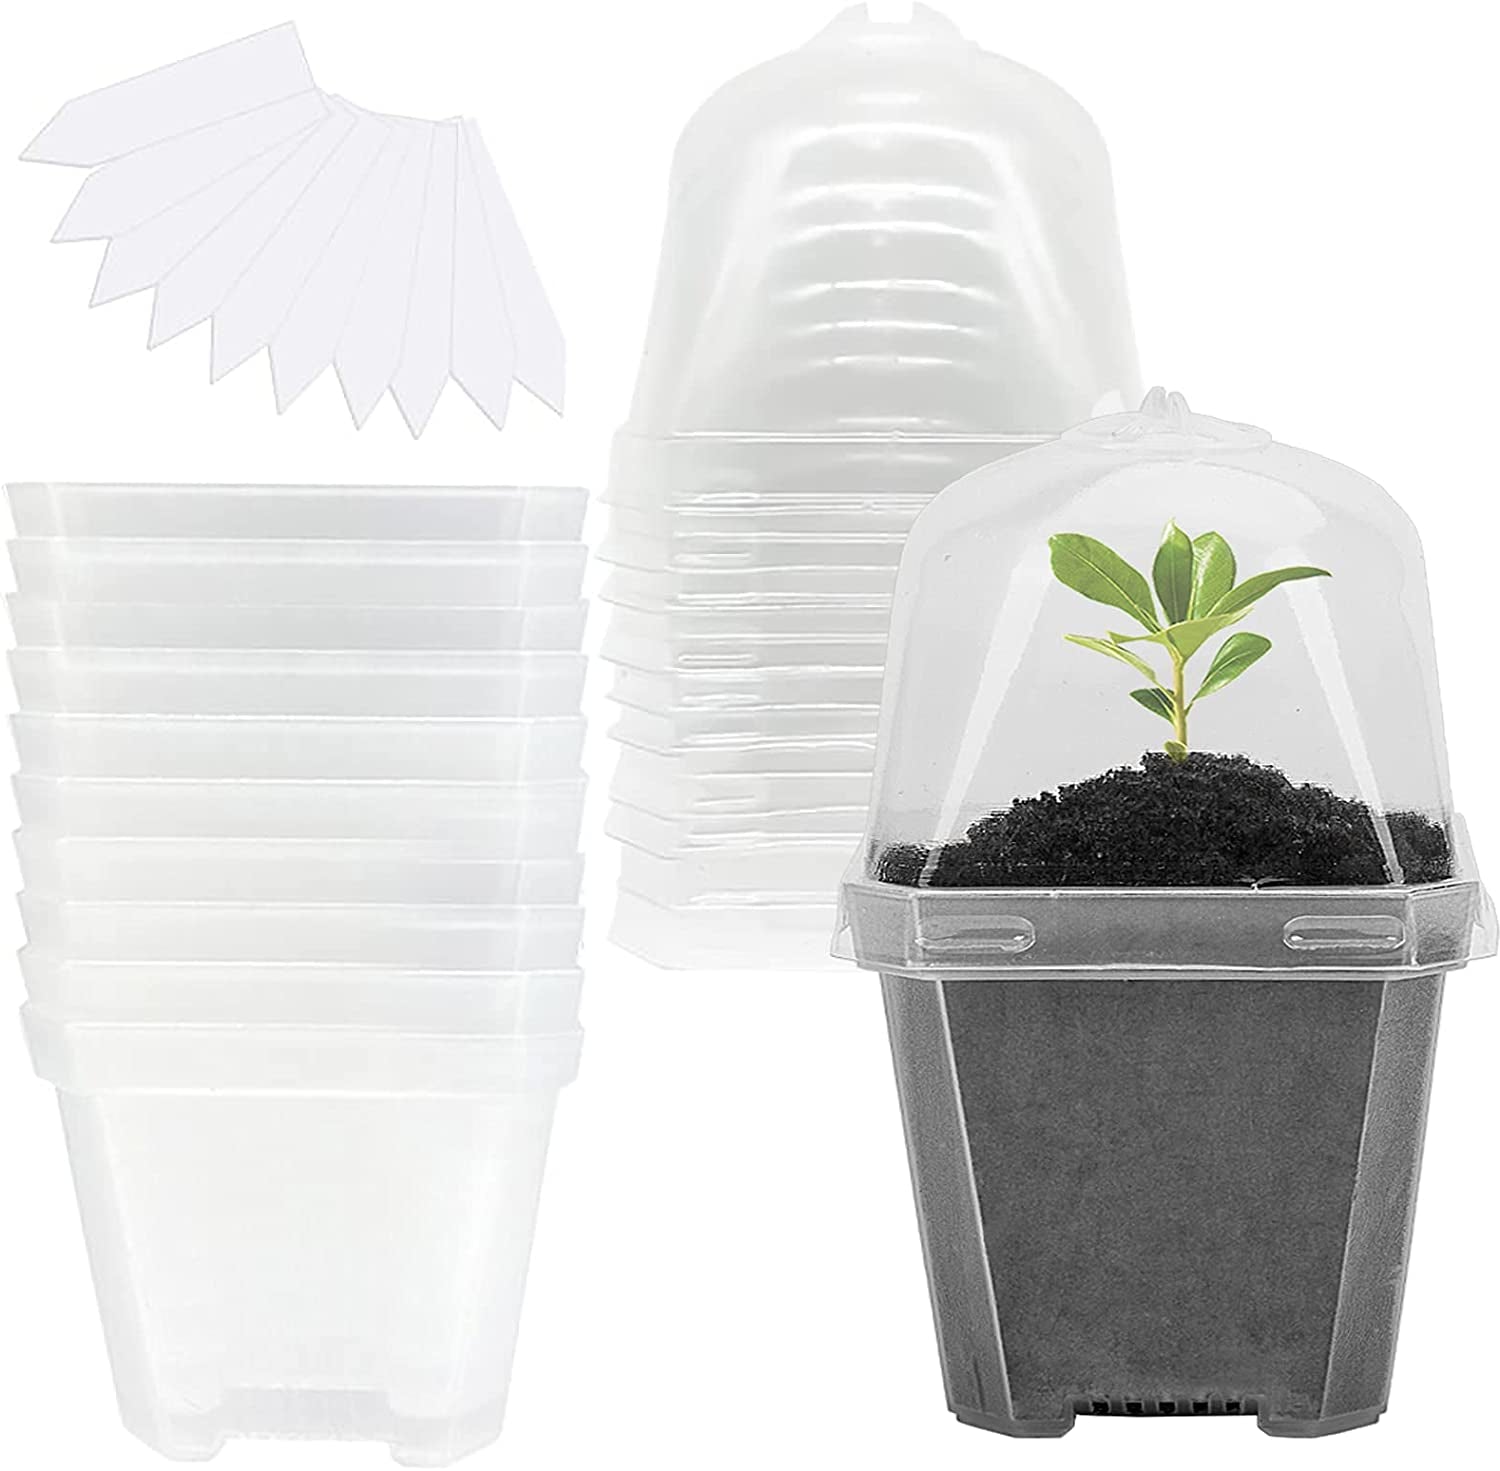 EBaokuup, Ebaokuup 10PCS Clear Plant Nursery Pots with Humidity Dome - 3" Plastic Gardening Pot with Labels, Durable Plastic Plant Container for Seedlings/Vegetables/Succulents/Cuttings